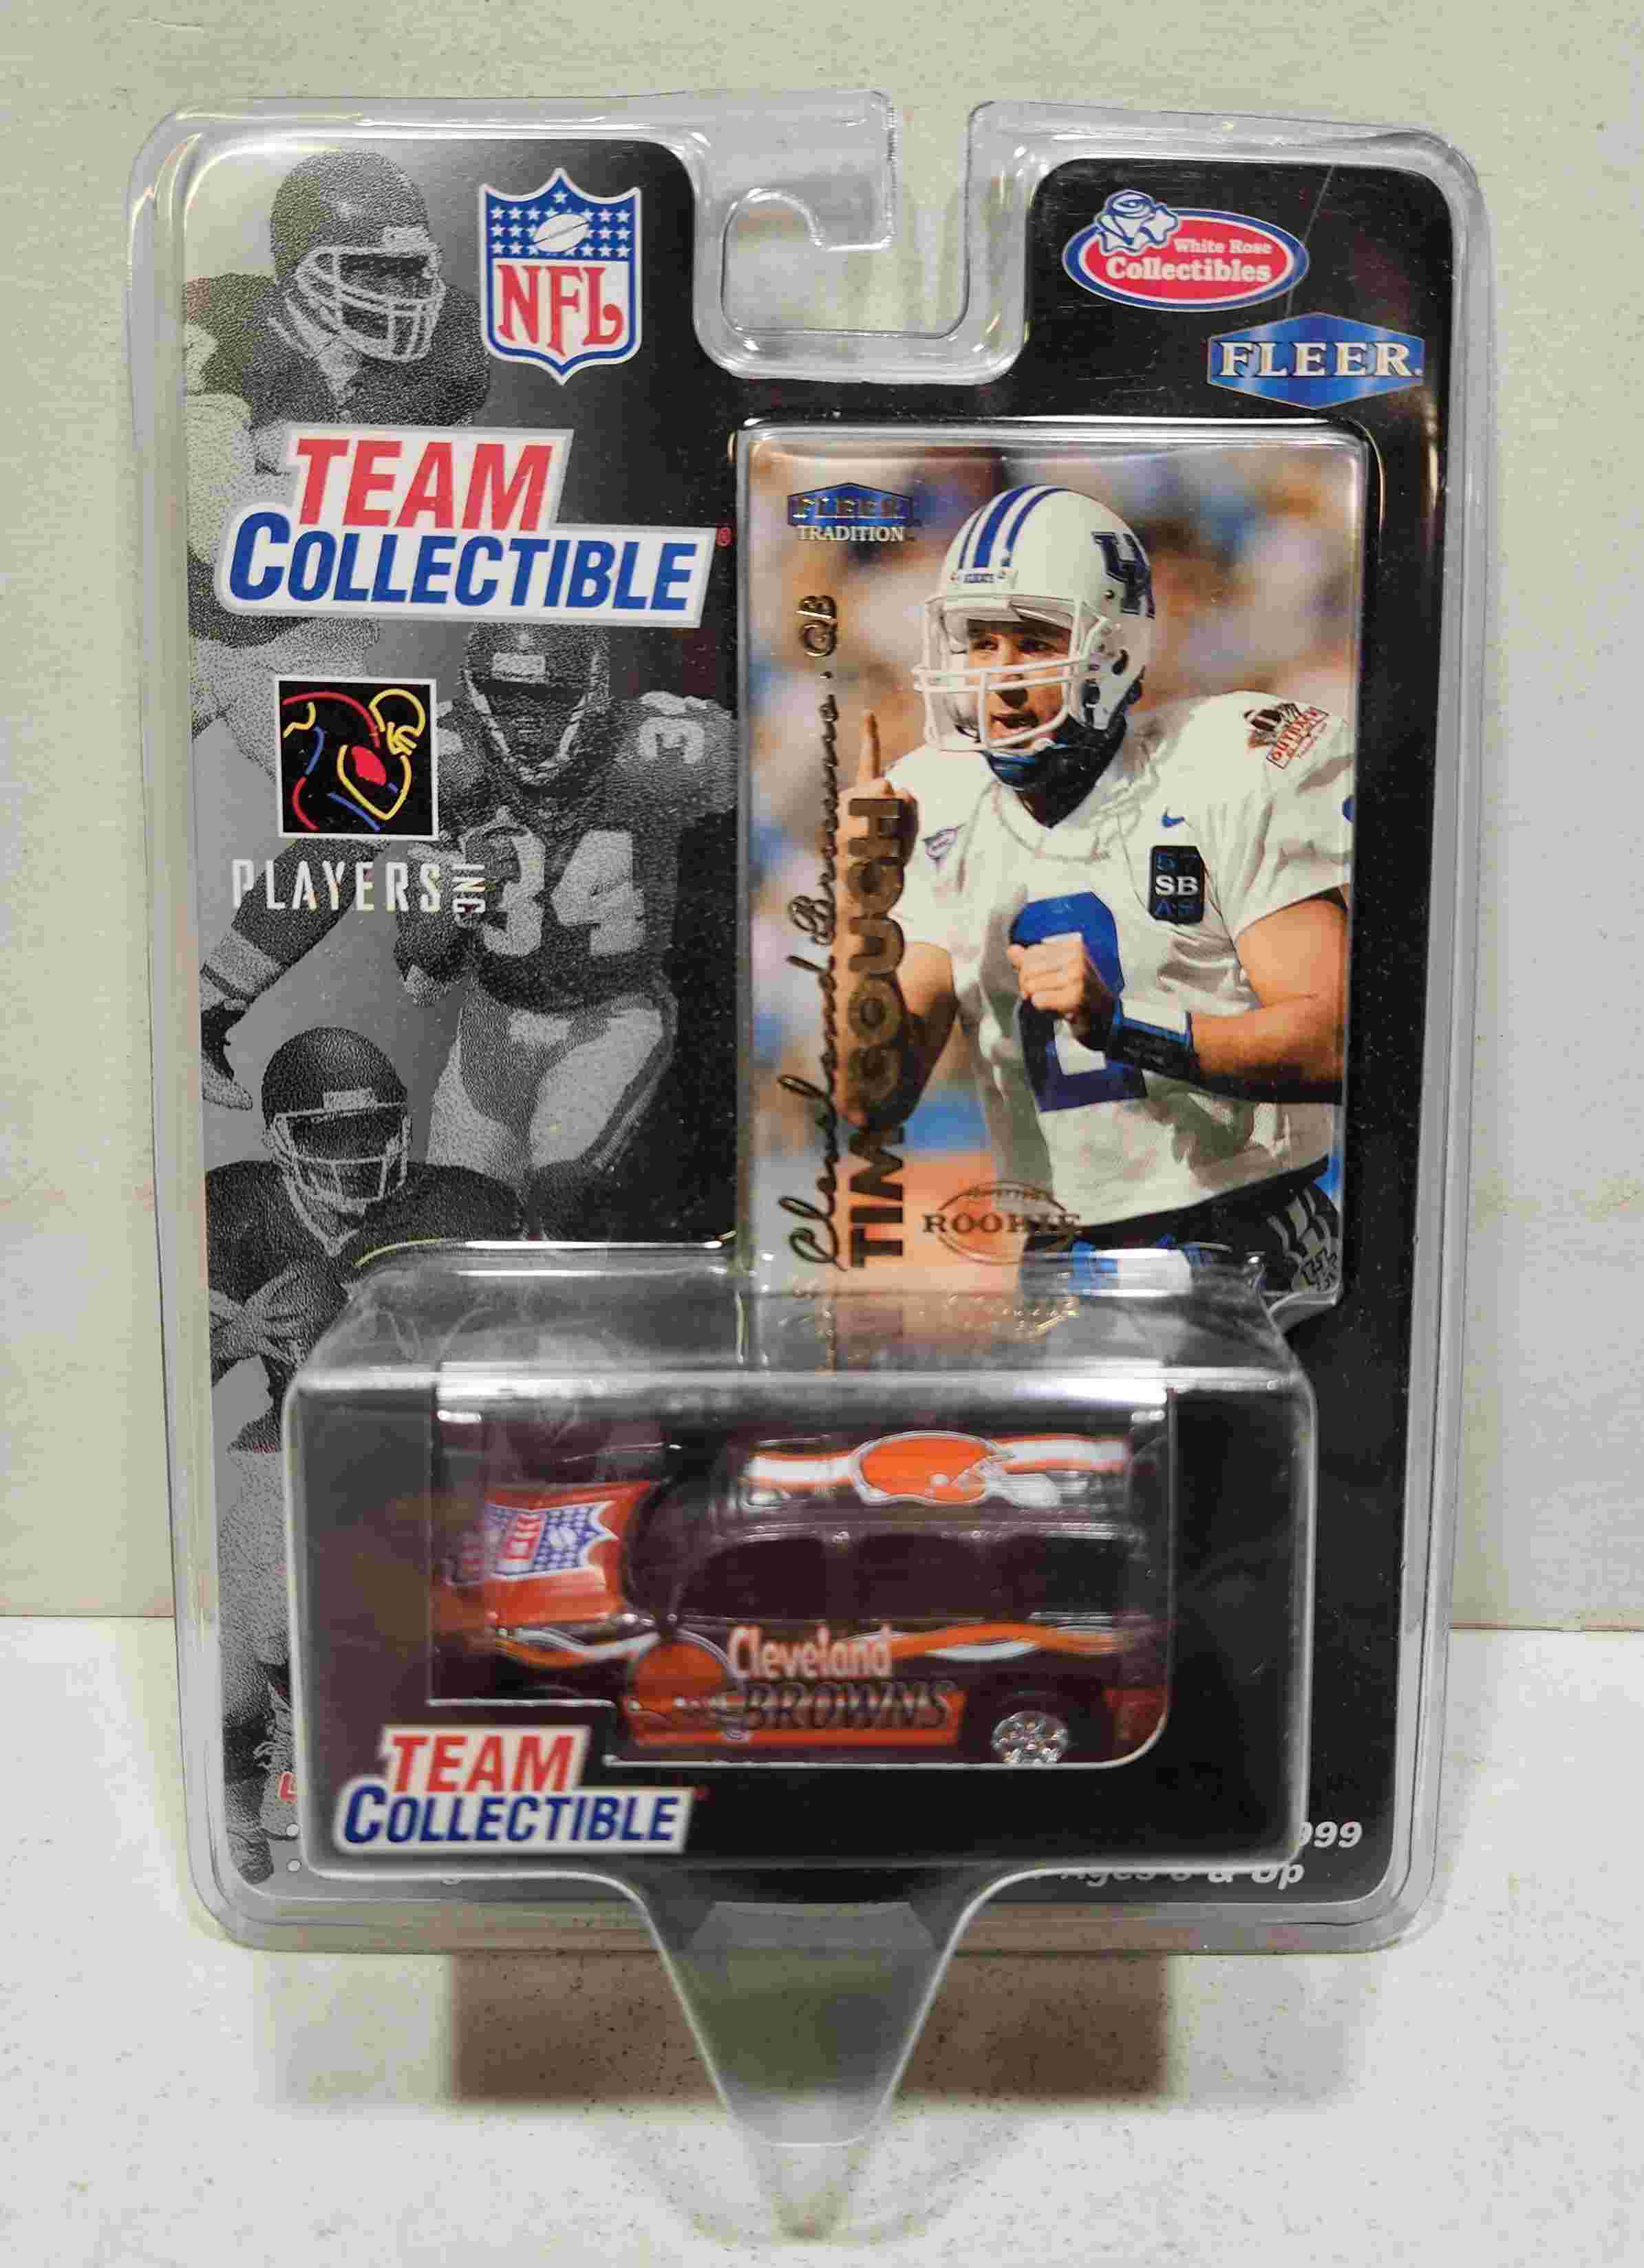 1999 Cleveland Browns 1/64th Yukon with Tim Couch trading card